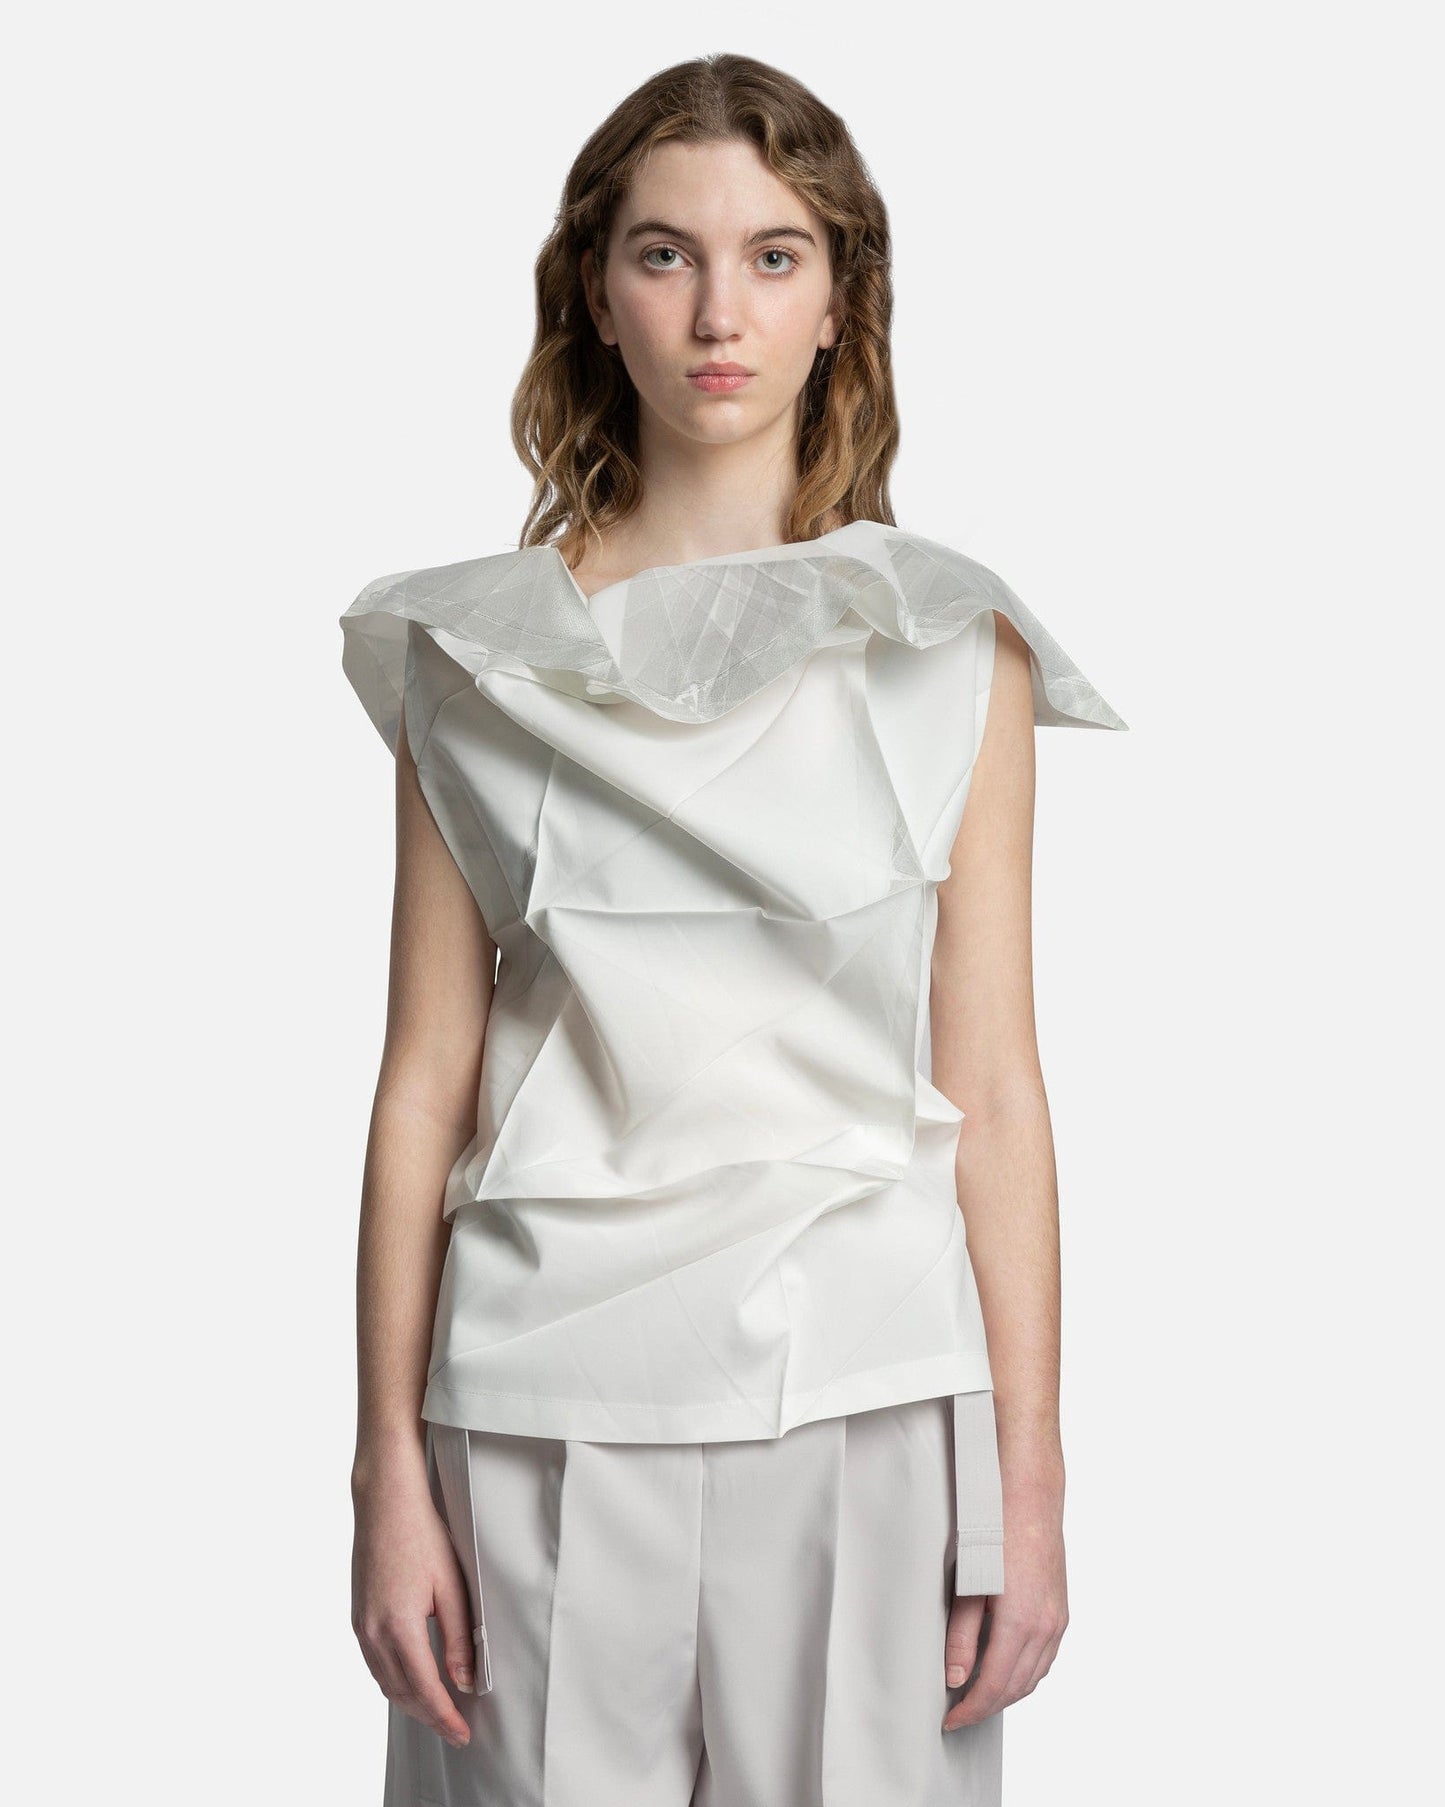 132 5. Issey Miyake Women Tops Standard Blouse in White/Silver